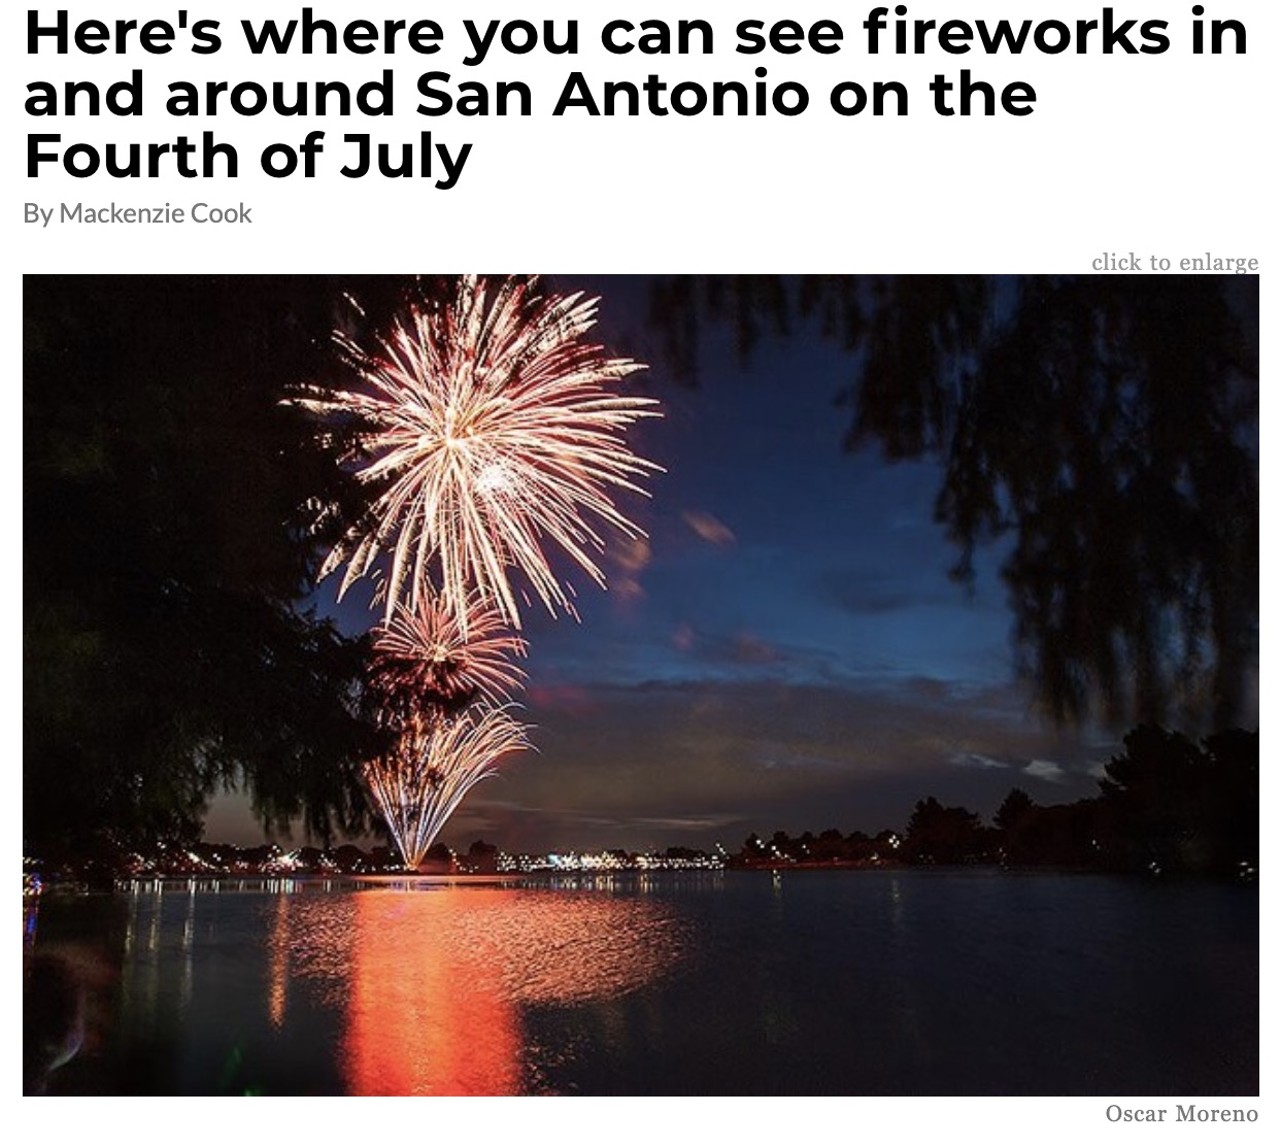 17. Here's where you can see fireworks in and around San Antonio on the Fourth of July 